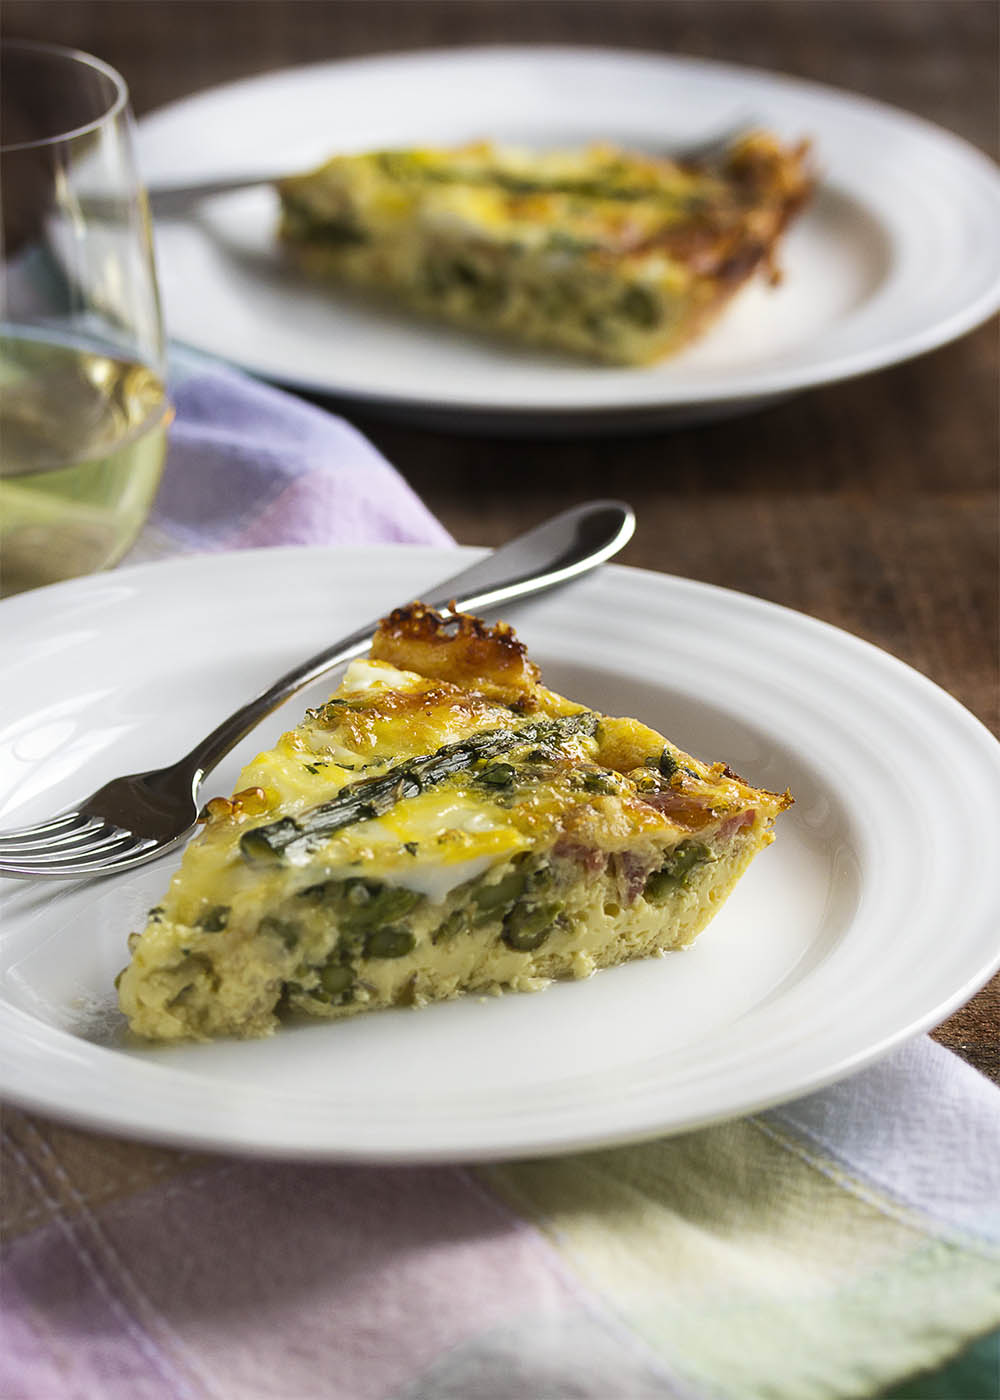 Asparagus and Bacon Crustless Quiche - This asparagus crustless quiche is full of asparagus and bacon and makes a great brunch dish or part of a spring-time lunch. | justalittlebitofbacon.com